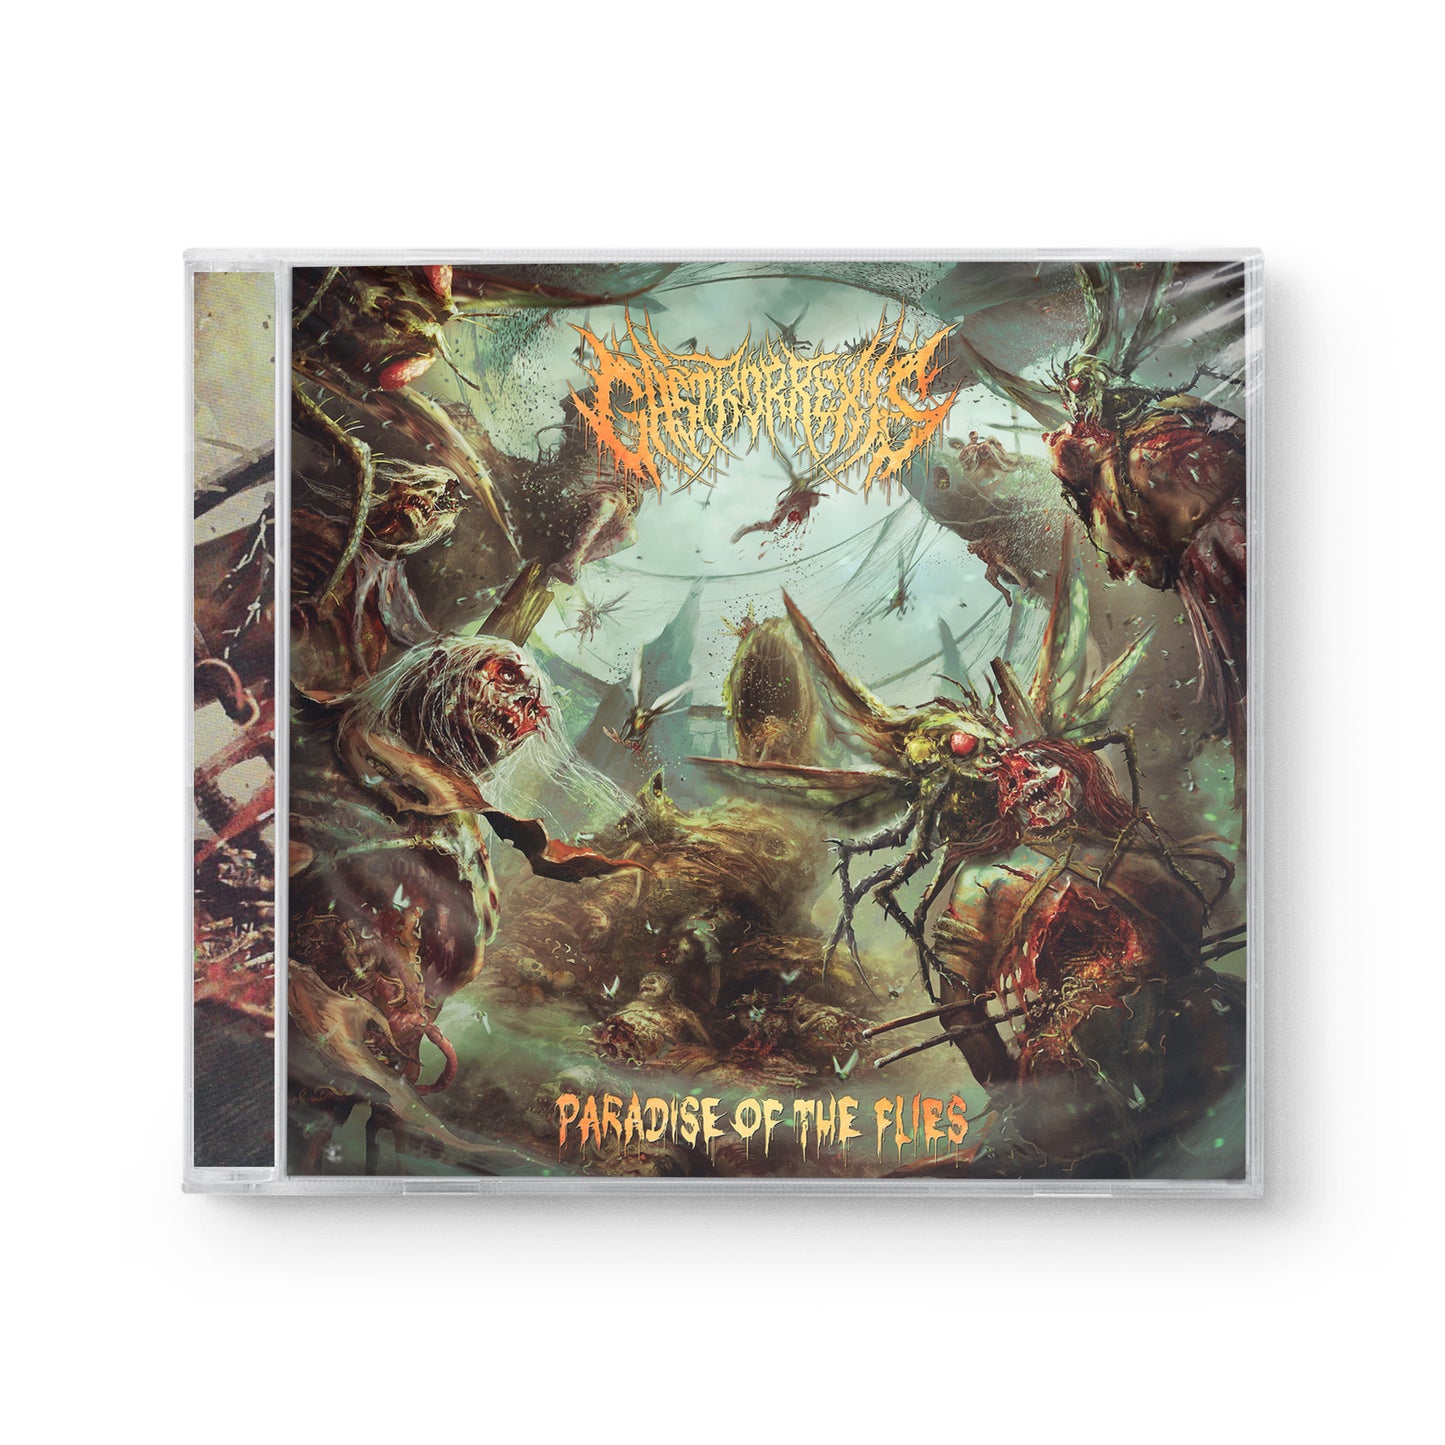 Gastrorrexis "Paradise Of The Flies" CD